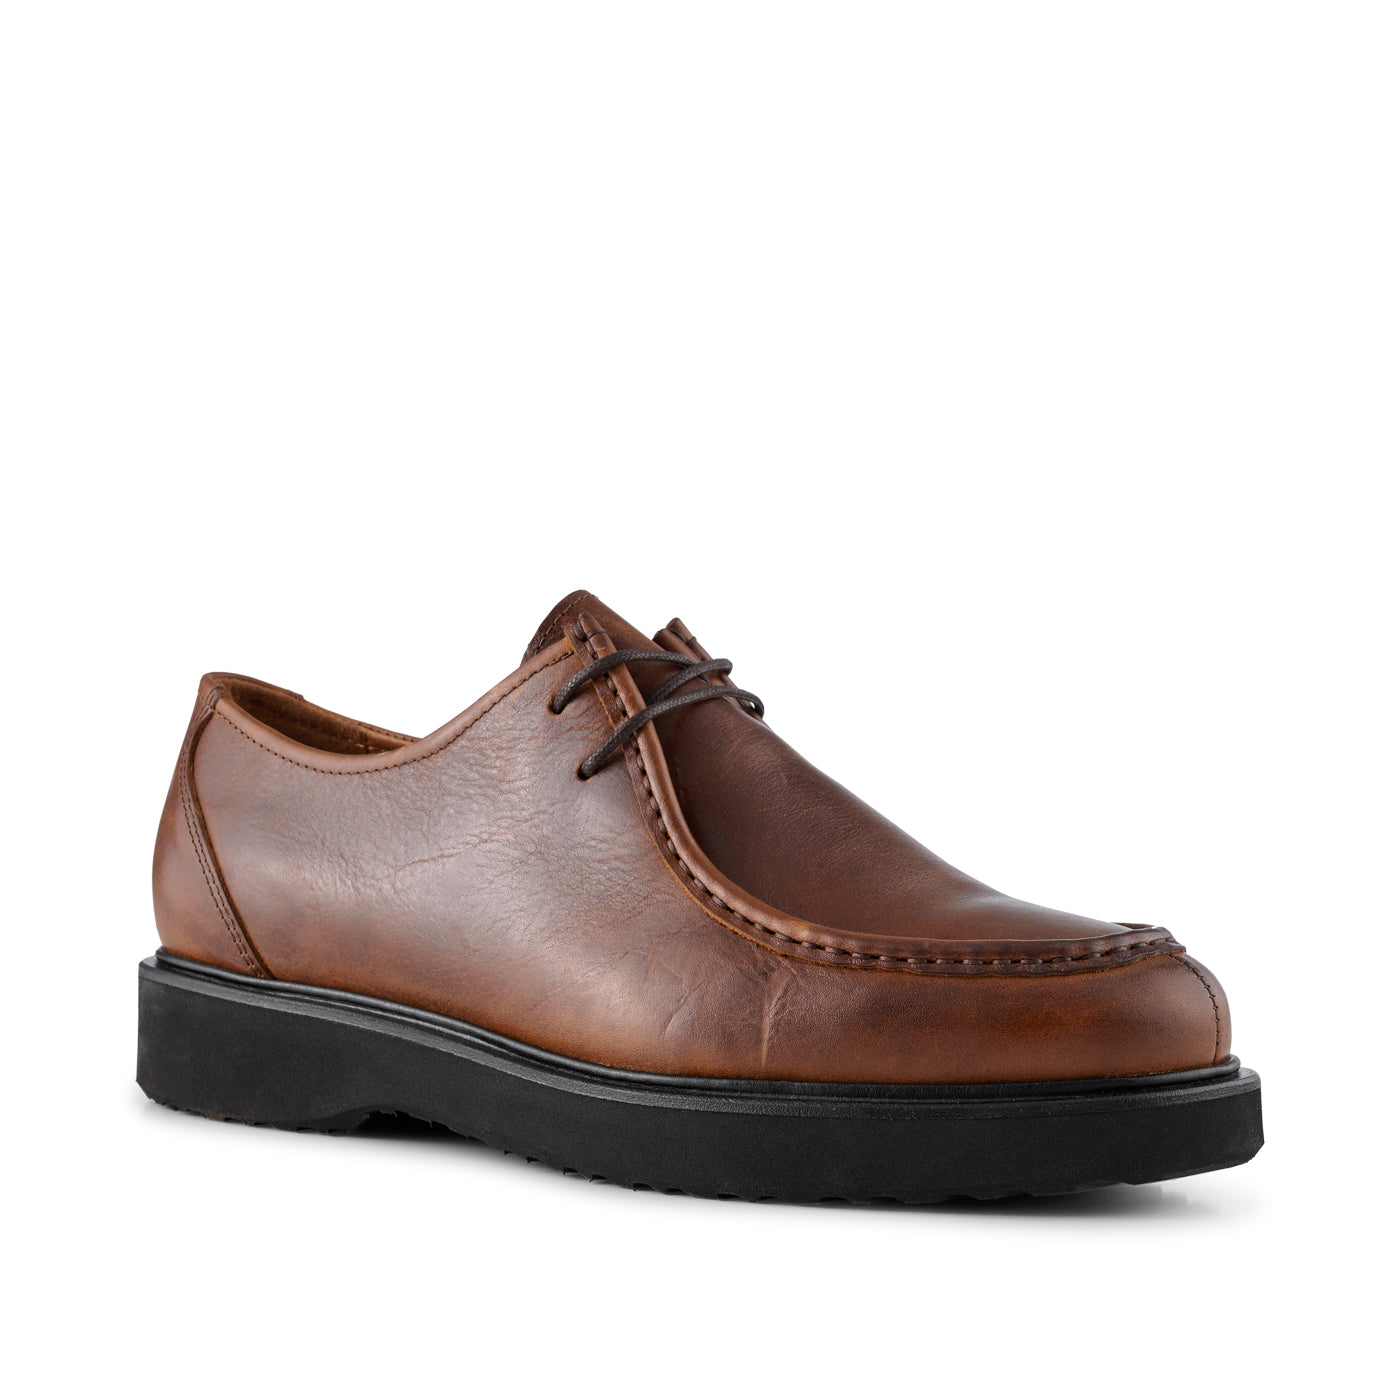 Cosmos apron shoe leather - BROWN